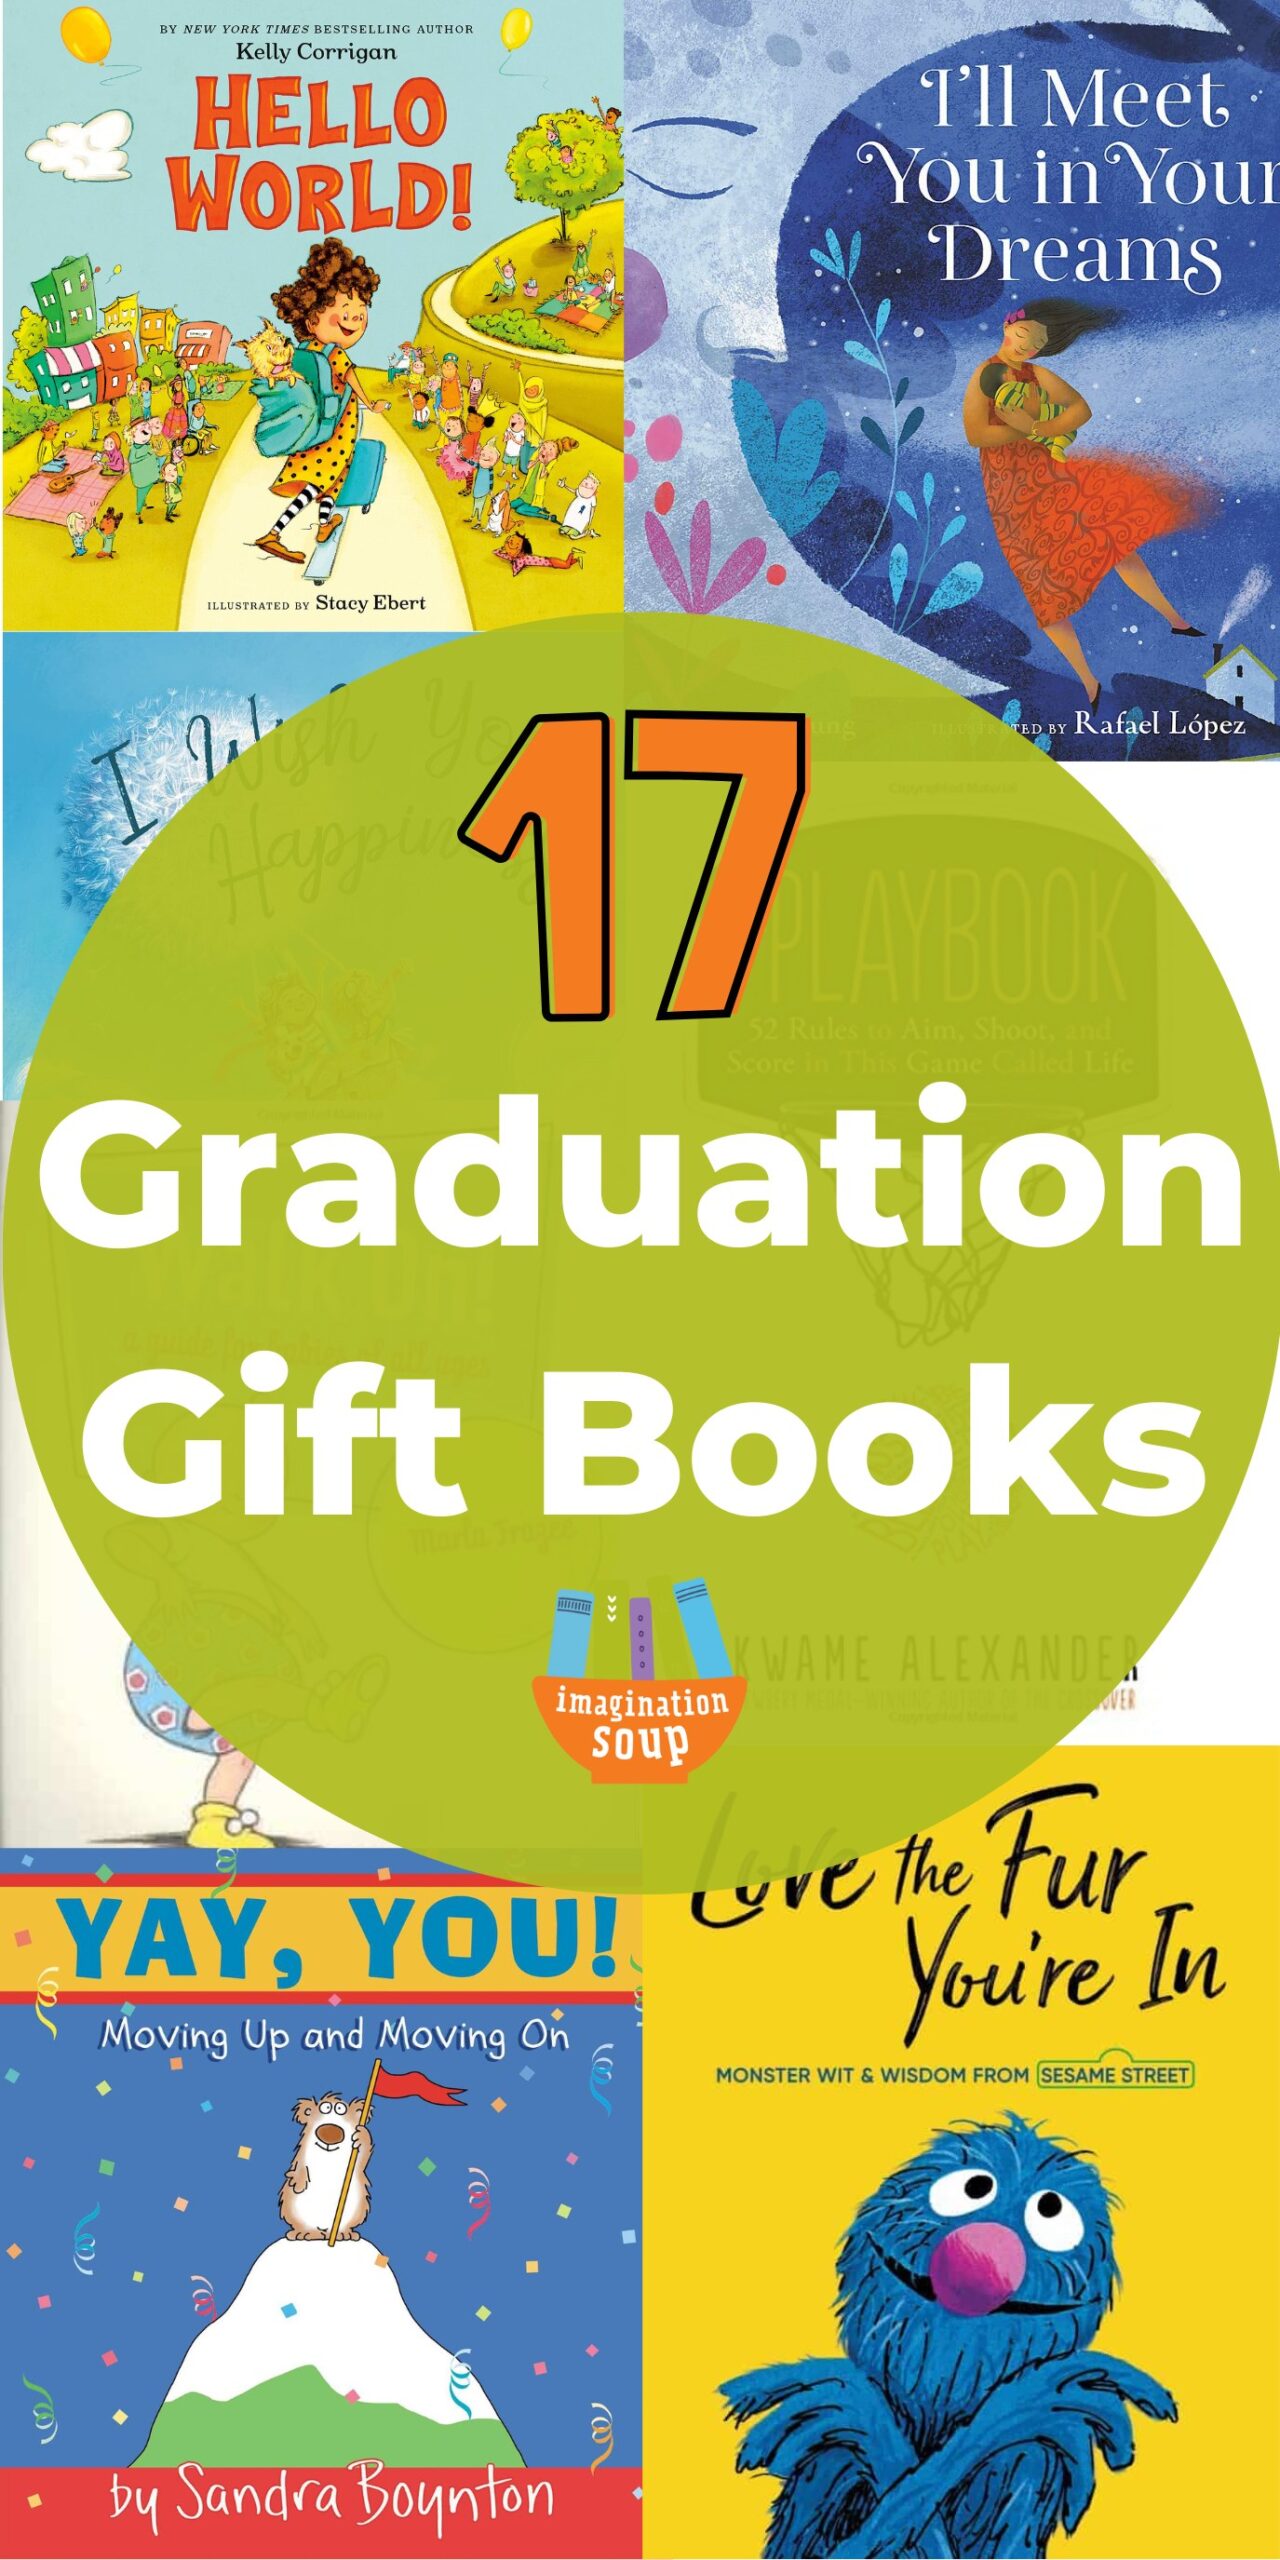 If you have an 8th grader, a 12th grader, or a senior in college, soon they will be graduating. (I'm already crying.) Gift one of these inspiring children's books to celebrate your child's accomplishment and upcoming life transition. Maybe one of these incredible picture books full of wisdom and encouragement will help them on their next big adventure.